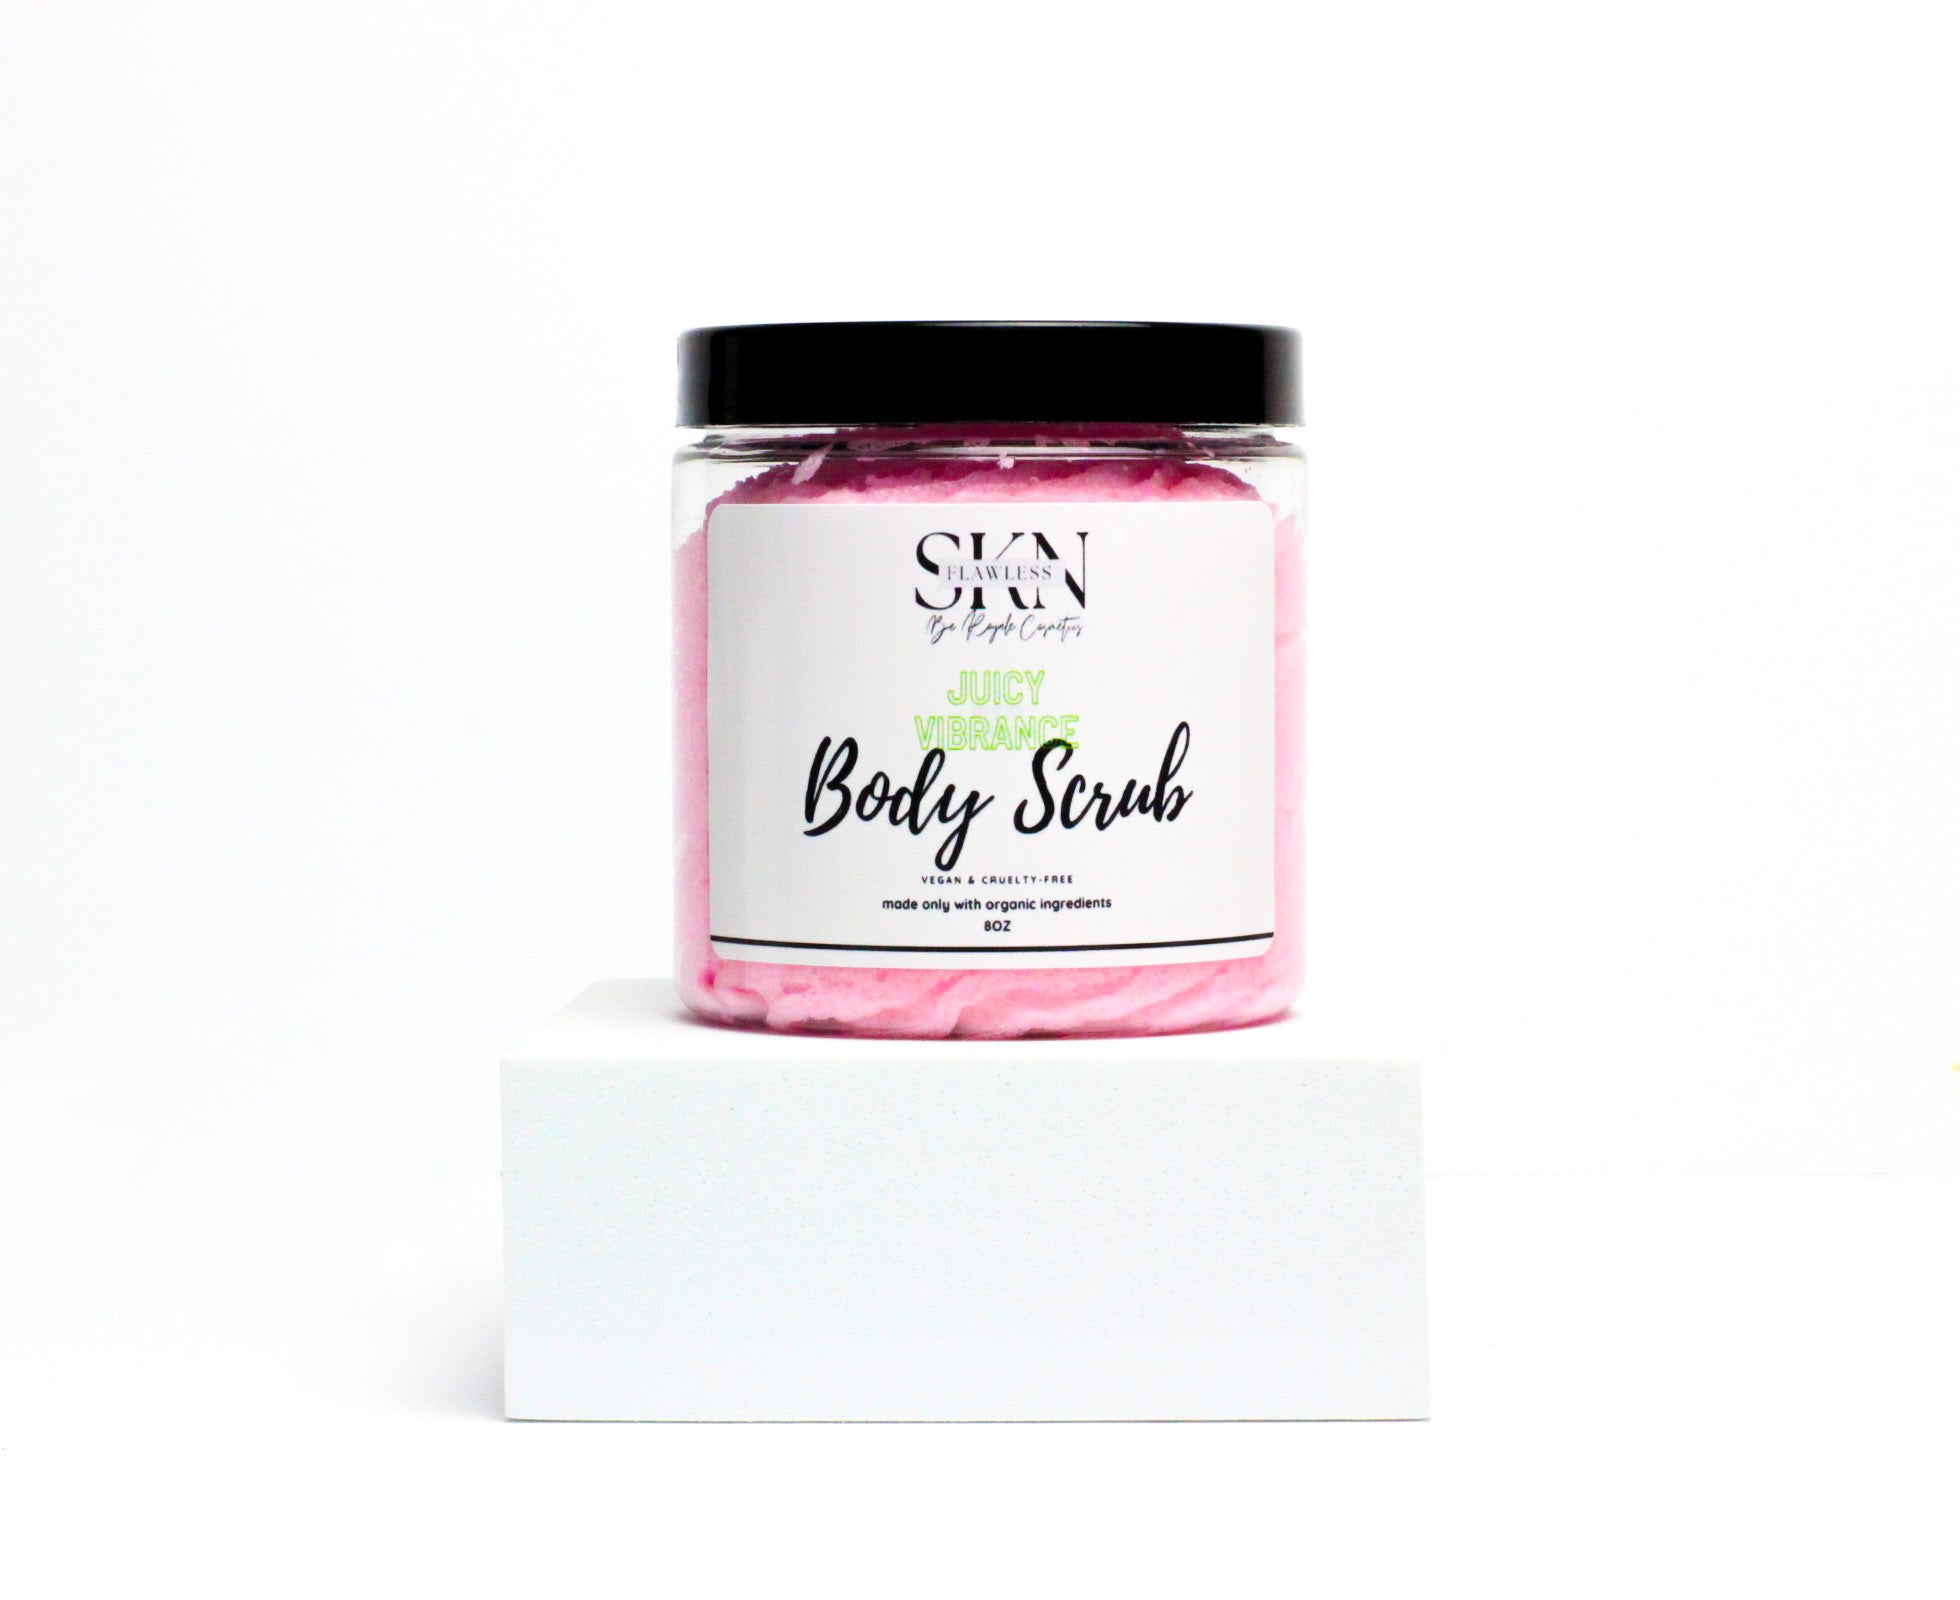 Flawless Skncare's Whipped Body Scrub